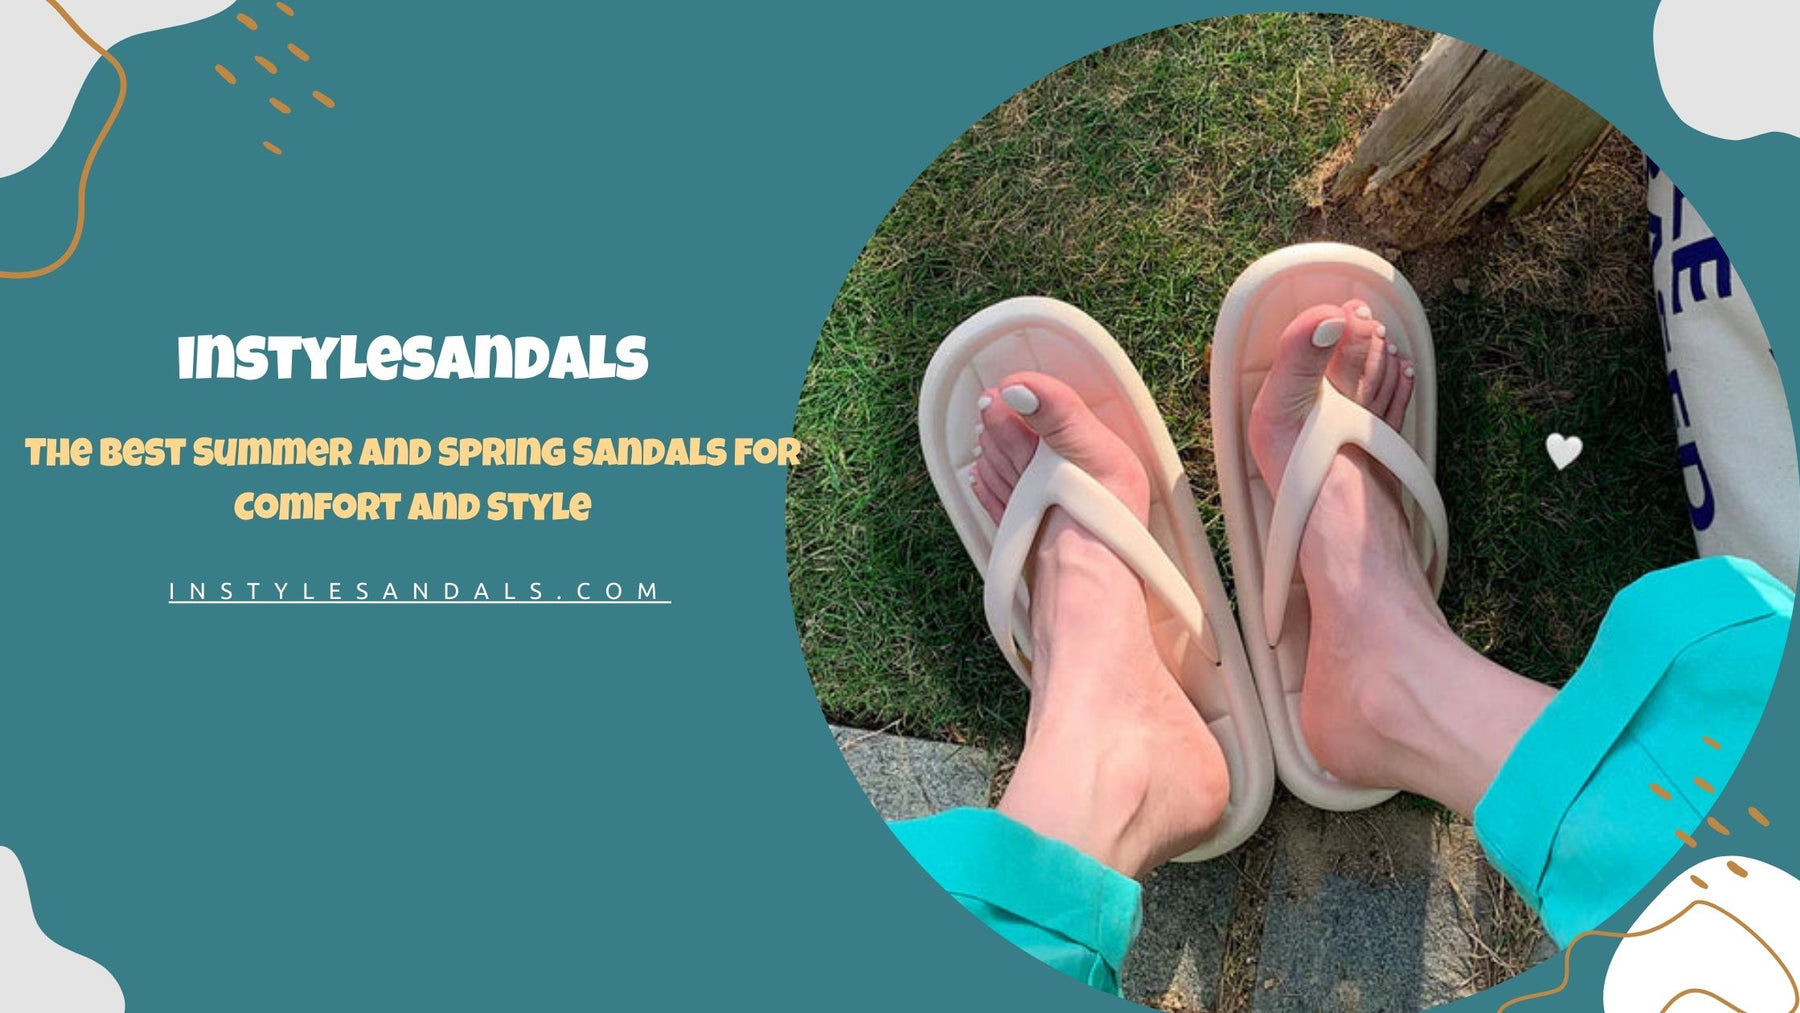 The Best Summer and Spring Sandals for Comfort and Style